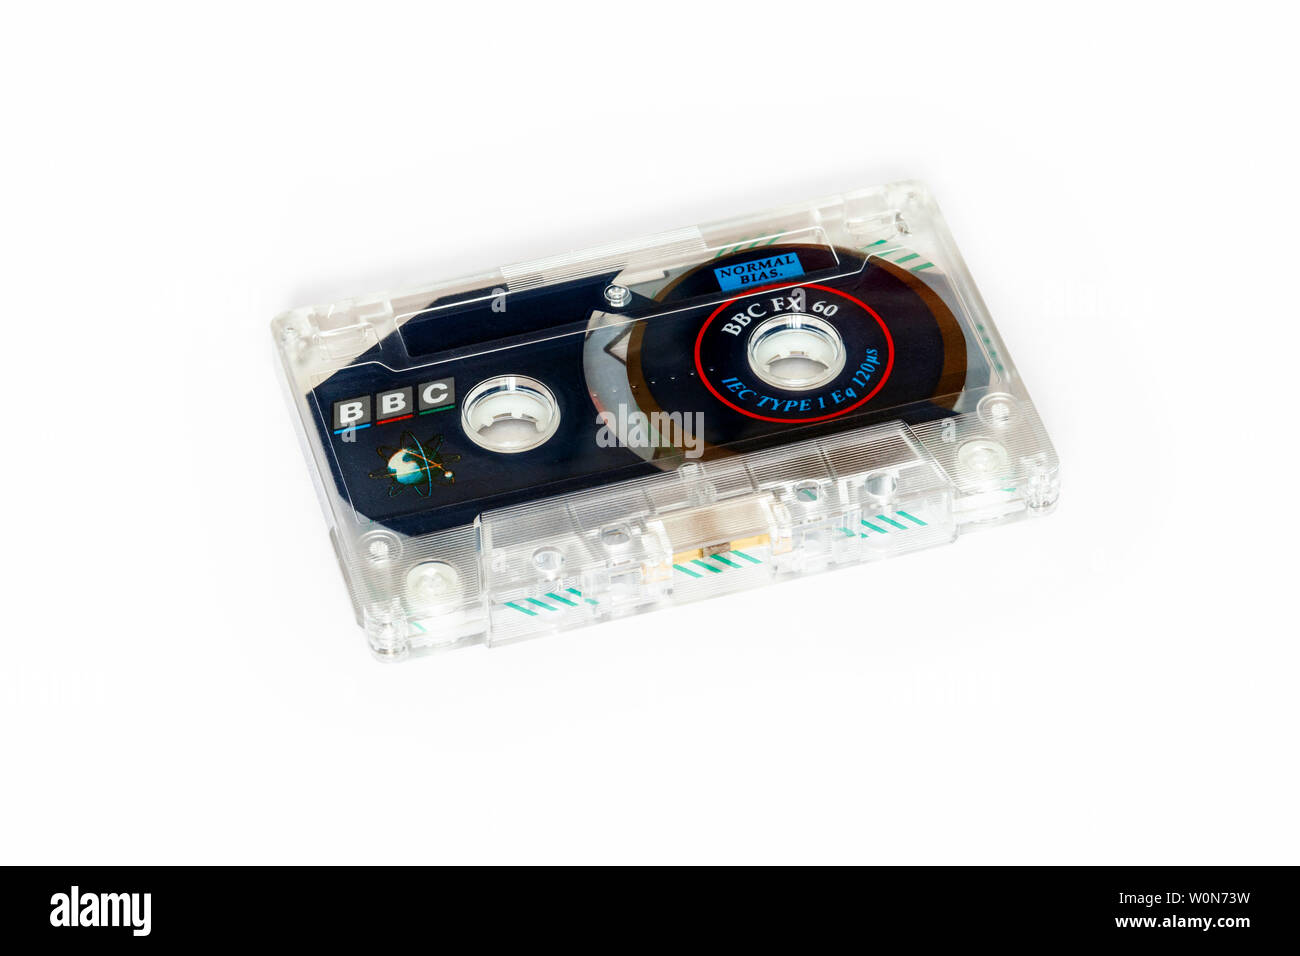 BBC FX-60 compact audio cassette tape isolated against a white background (1980s) Stock Photo